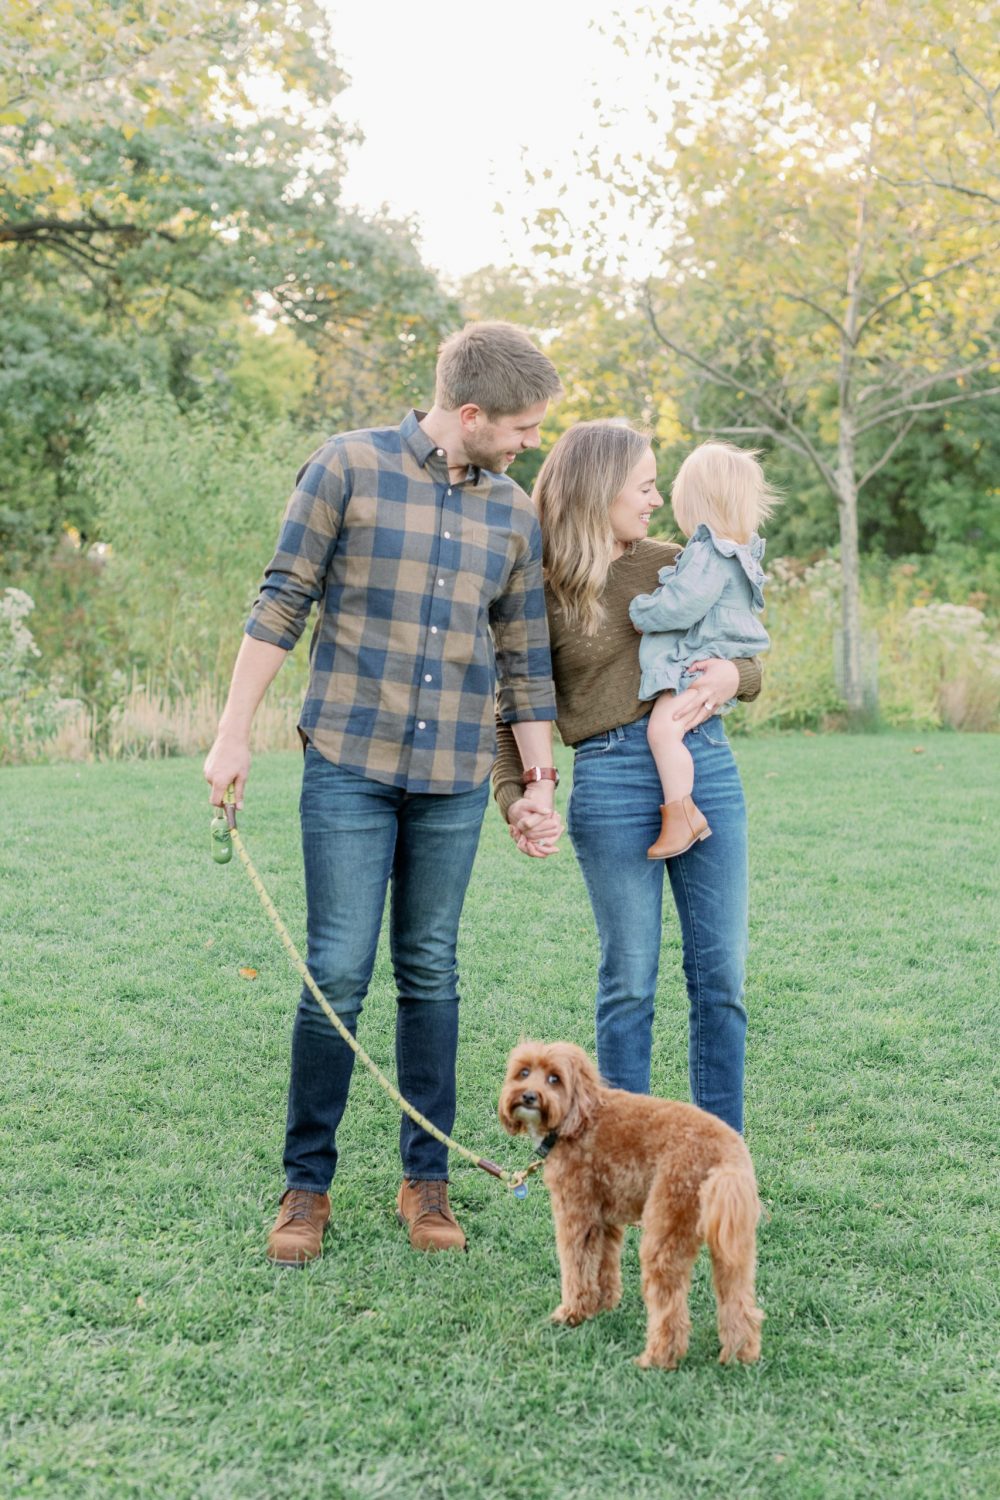 Dog Friendly Photo Locations in Chicago Suburbs